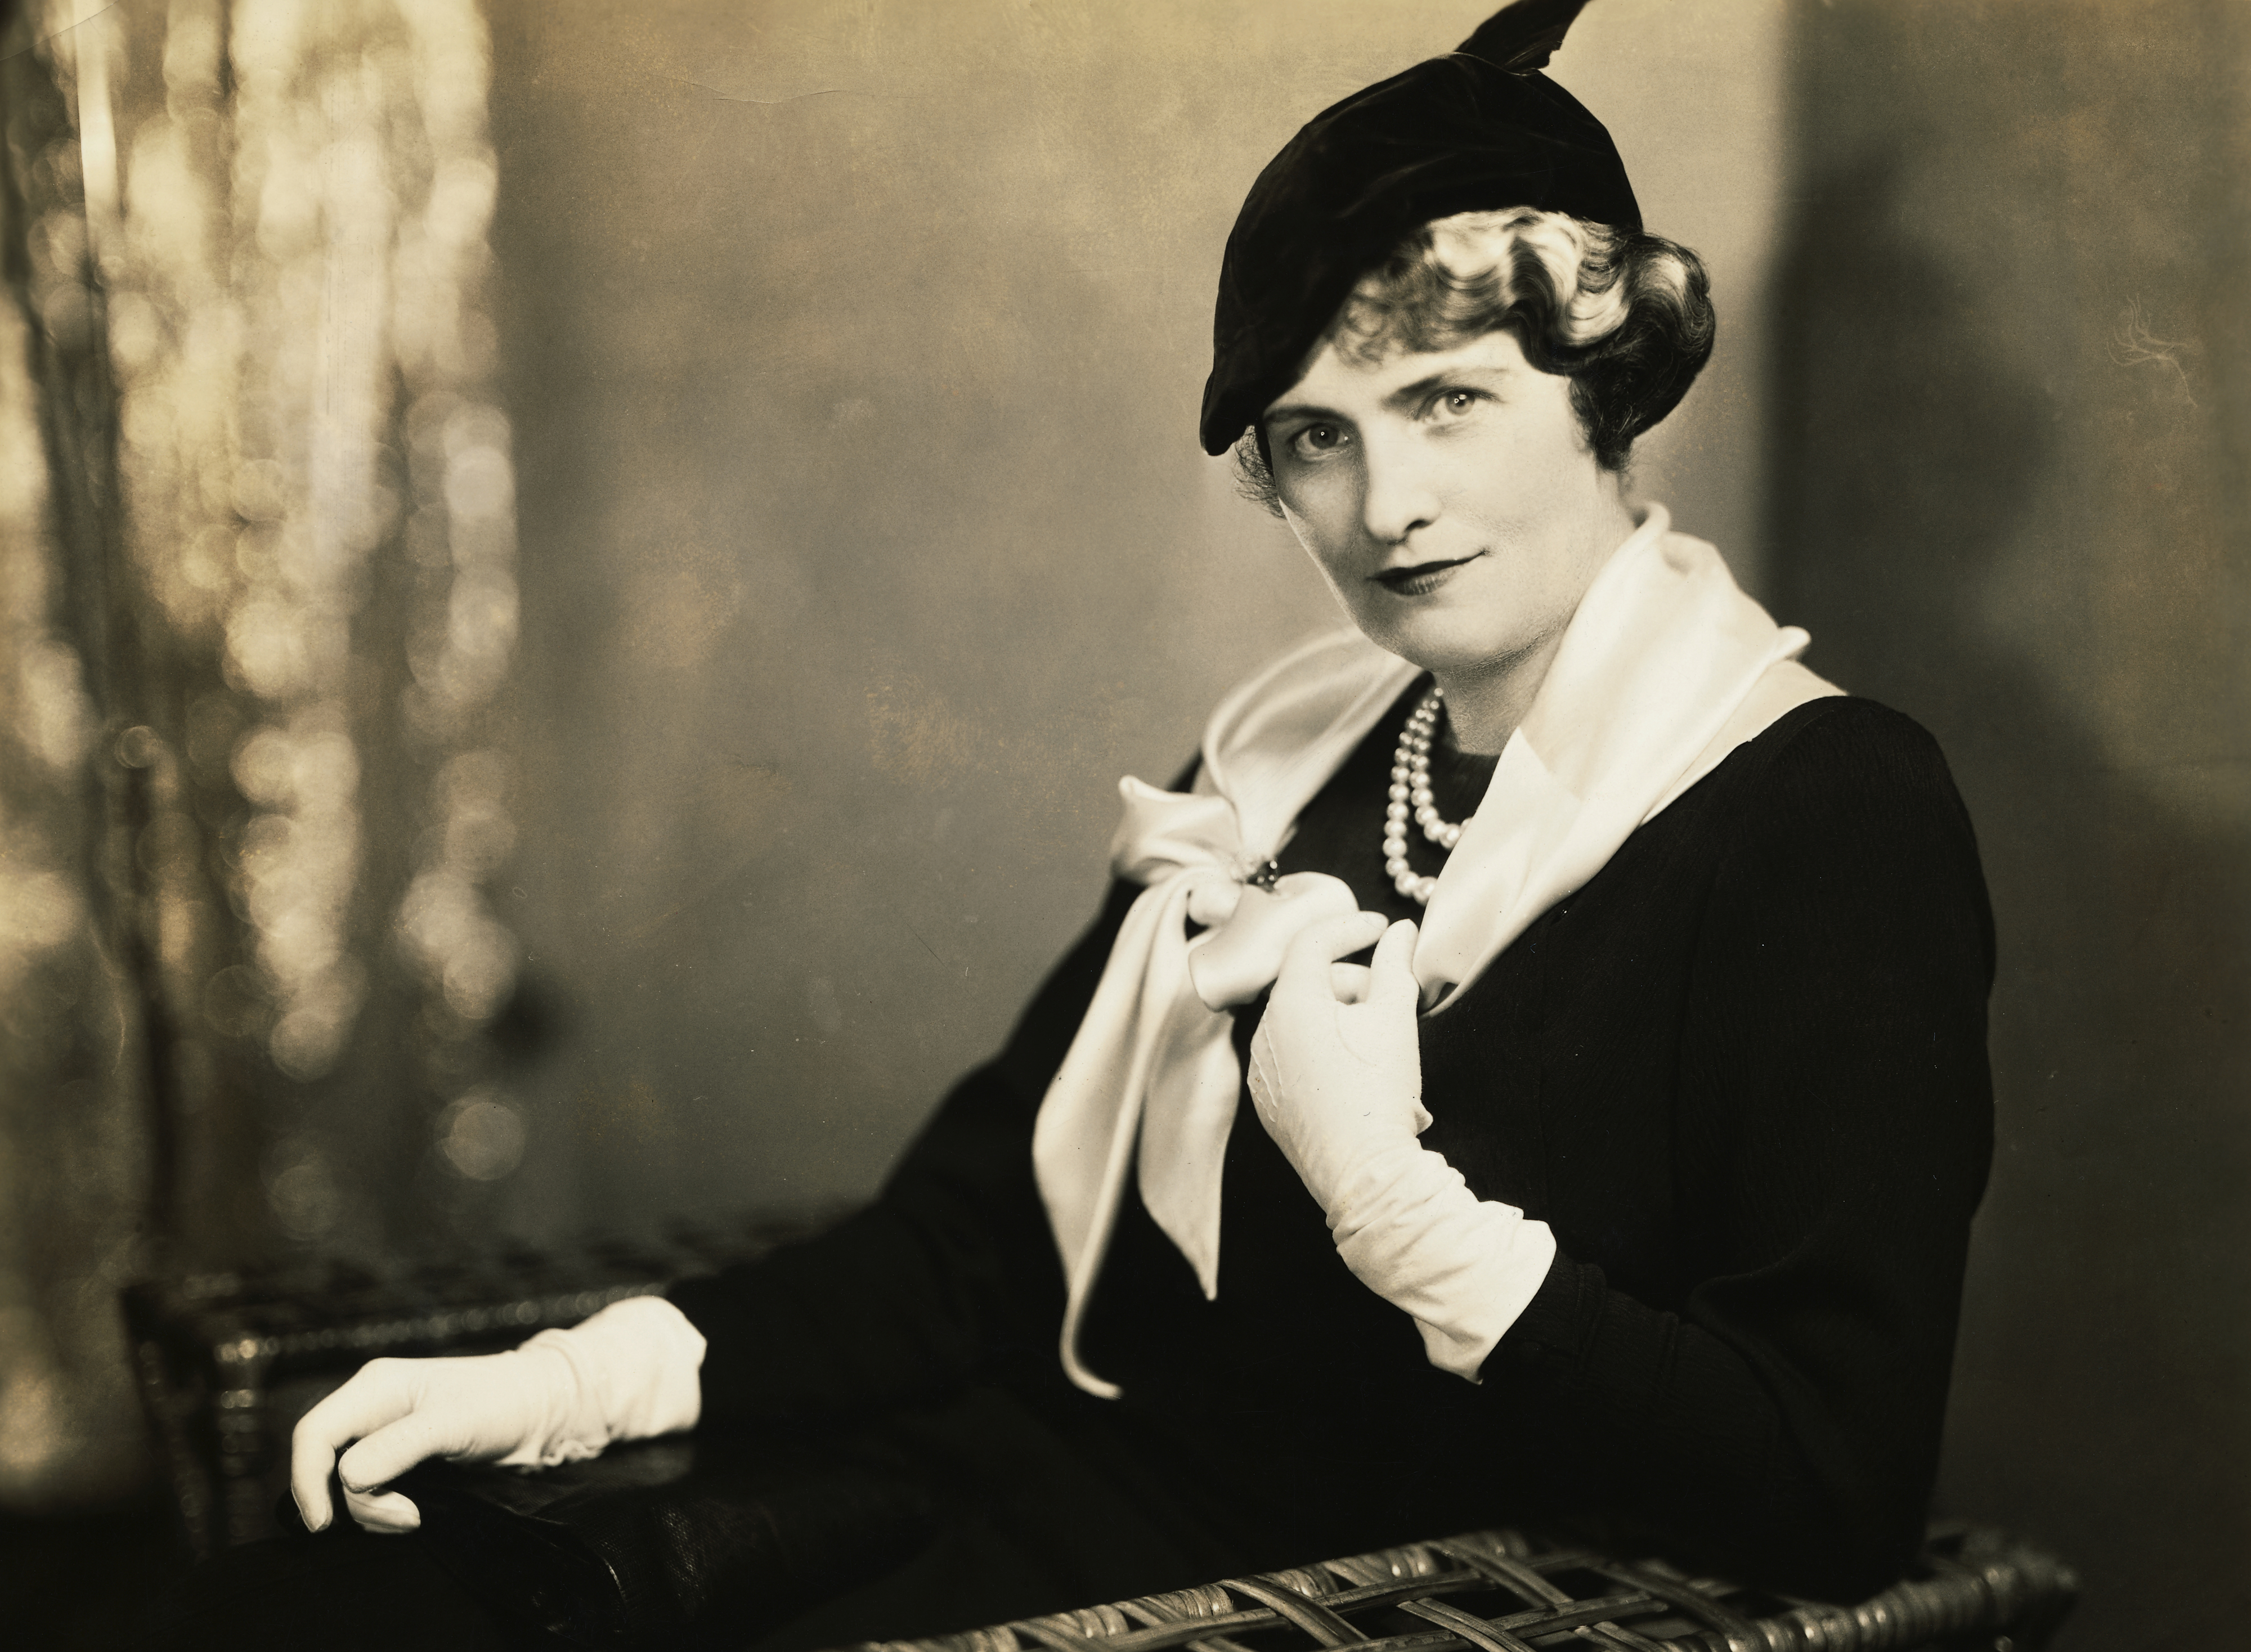 Close-up of woman wearing pearls and gloves